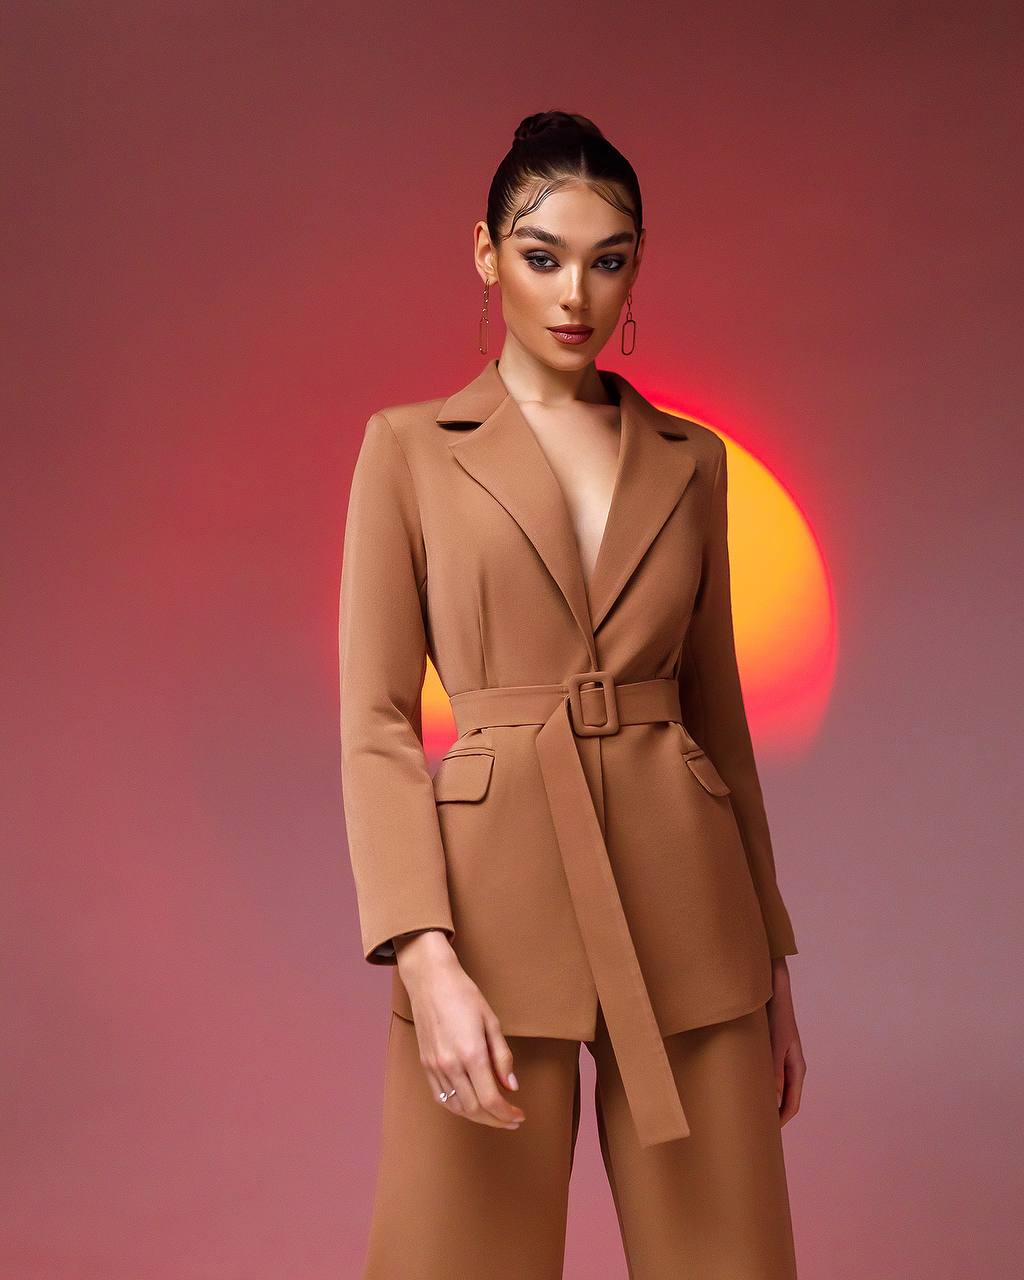 a woman wearing a tan suit and matching heels